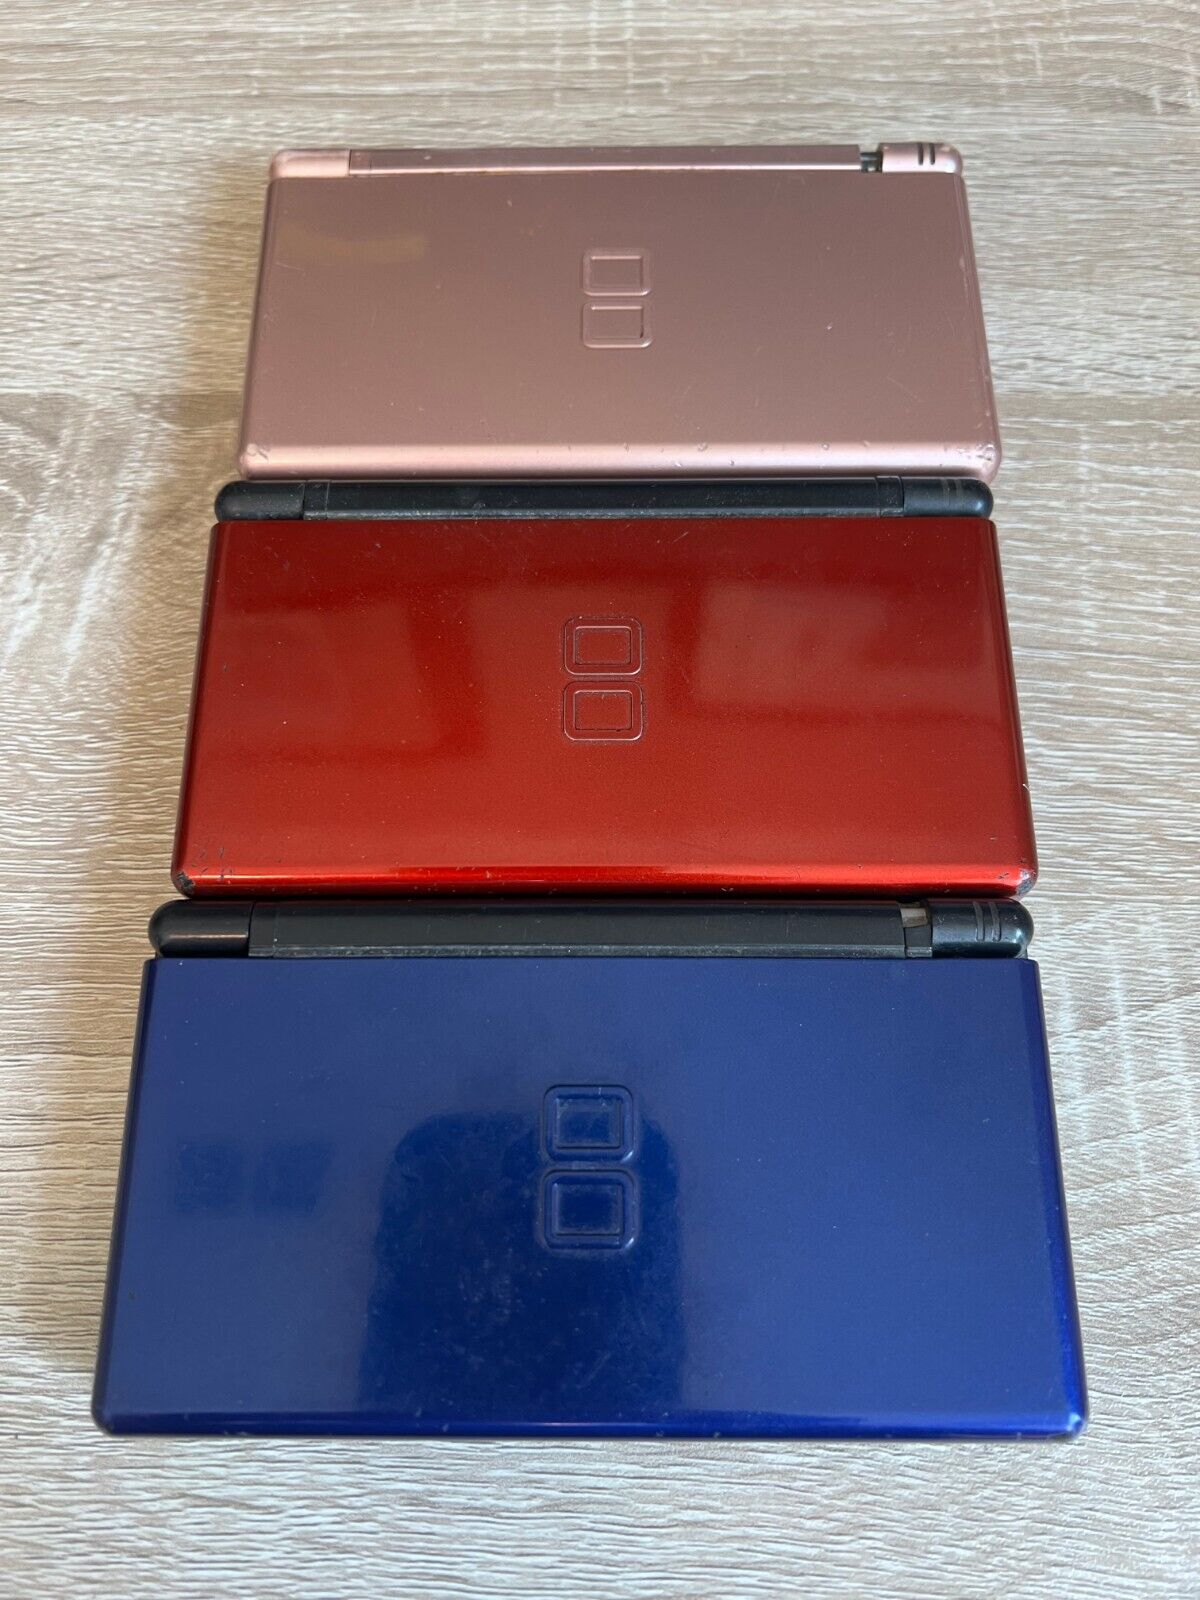 NON-WORKING FOR PARTS THREE (3) Pink/Blue/Red Nintendo DS Lite Game Systems